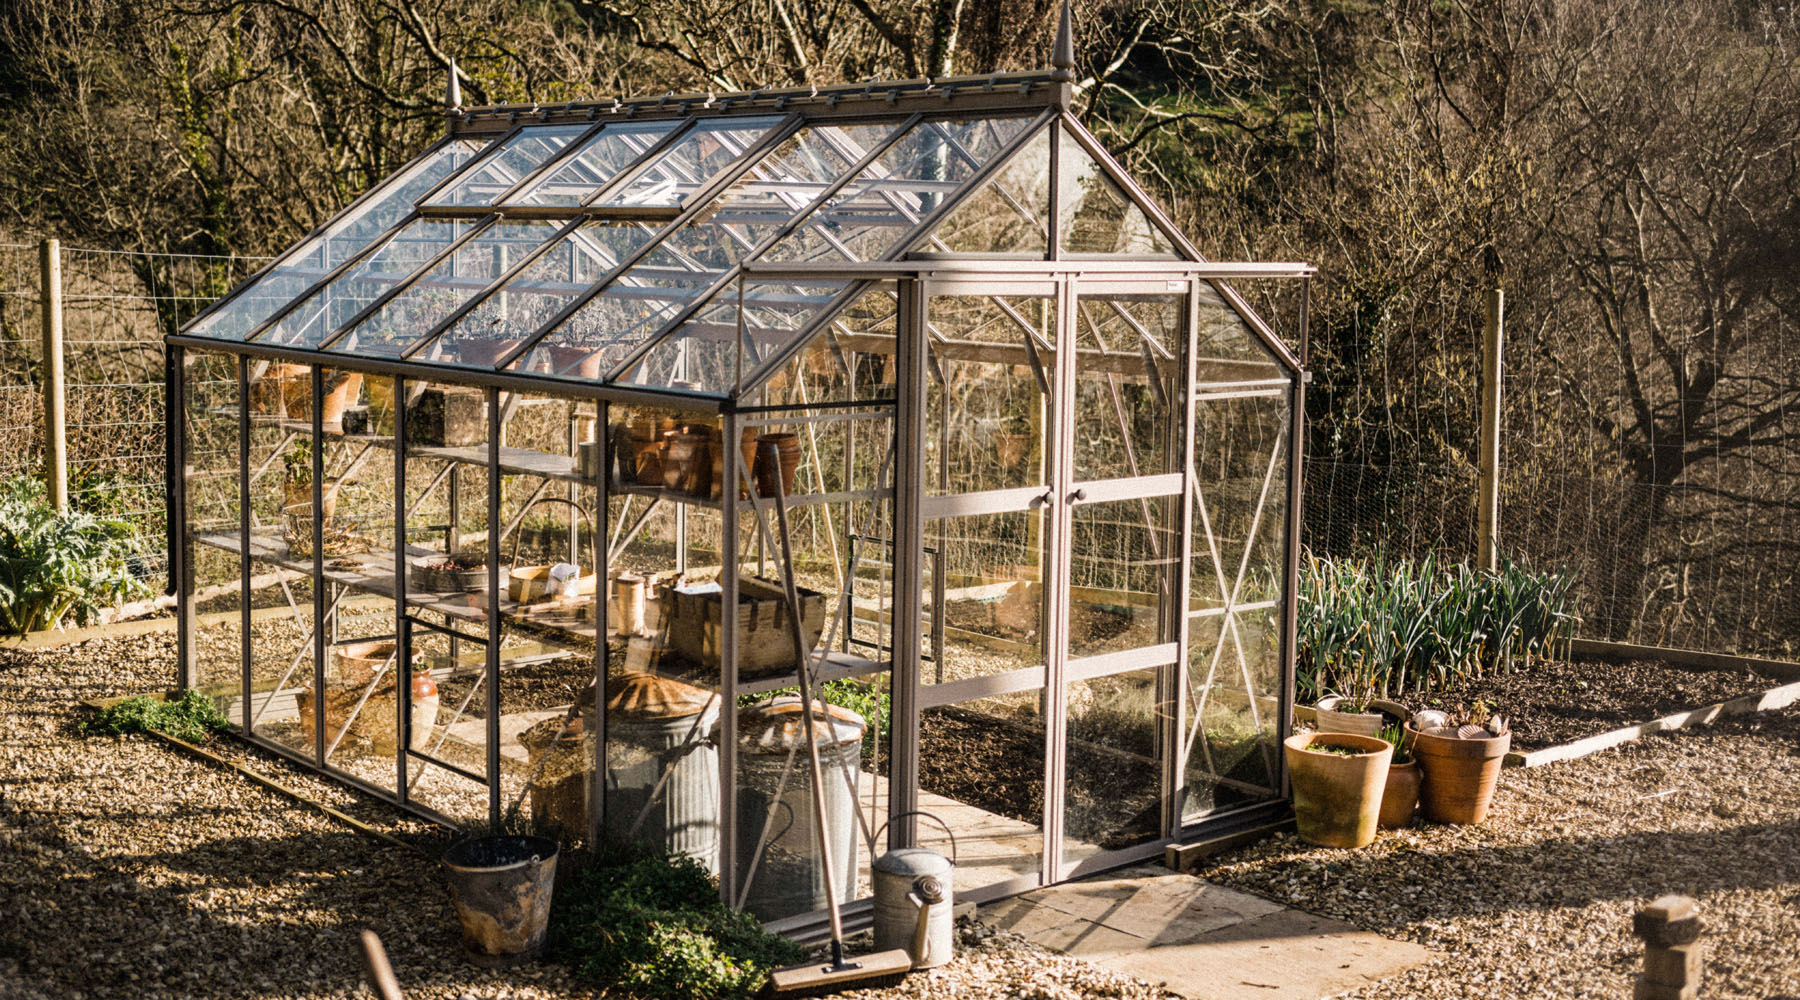 What to Consider When Purchasing Your Greenhouse